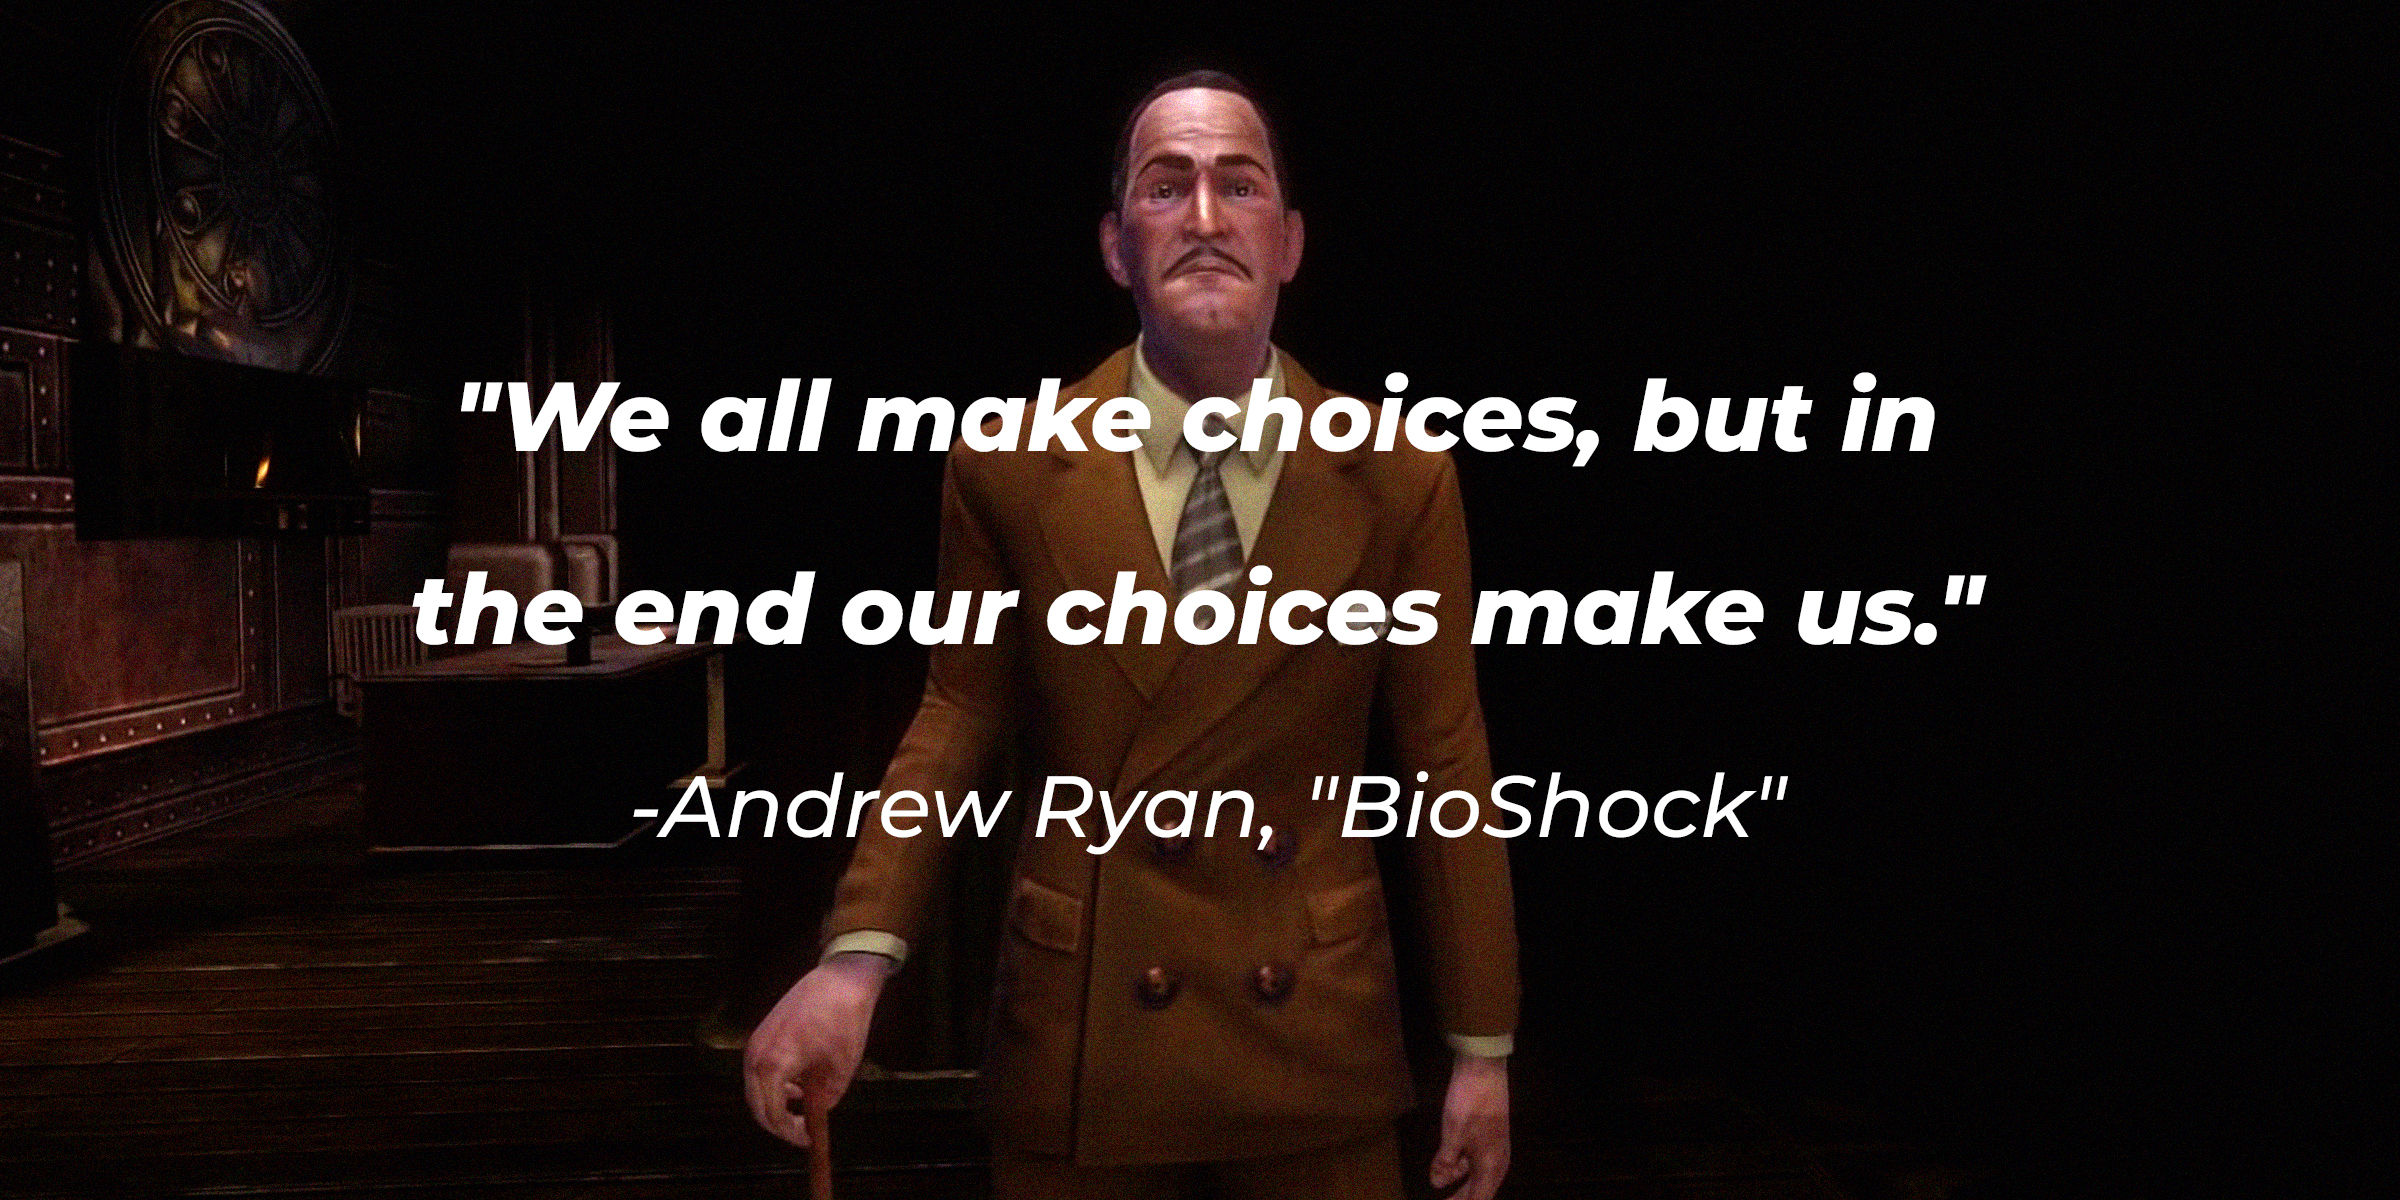 Andrew Ryan with his quote: "We all make choices, but in the end, our choices make us." | Source: Youtube.com/glp